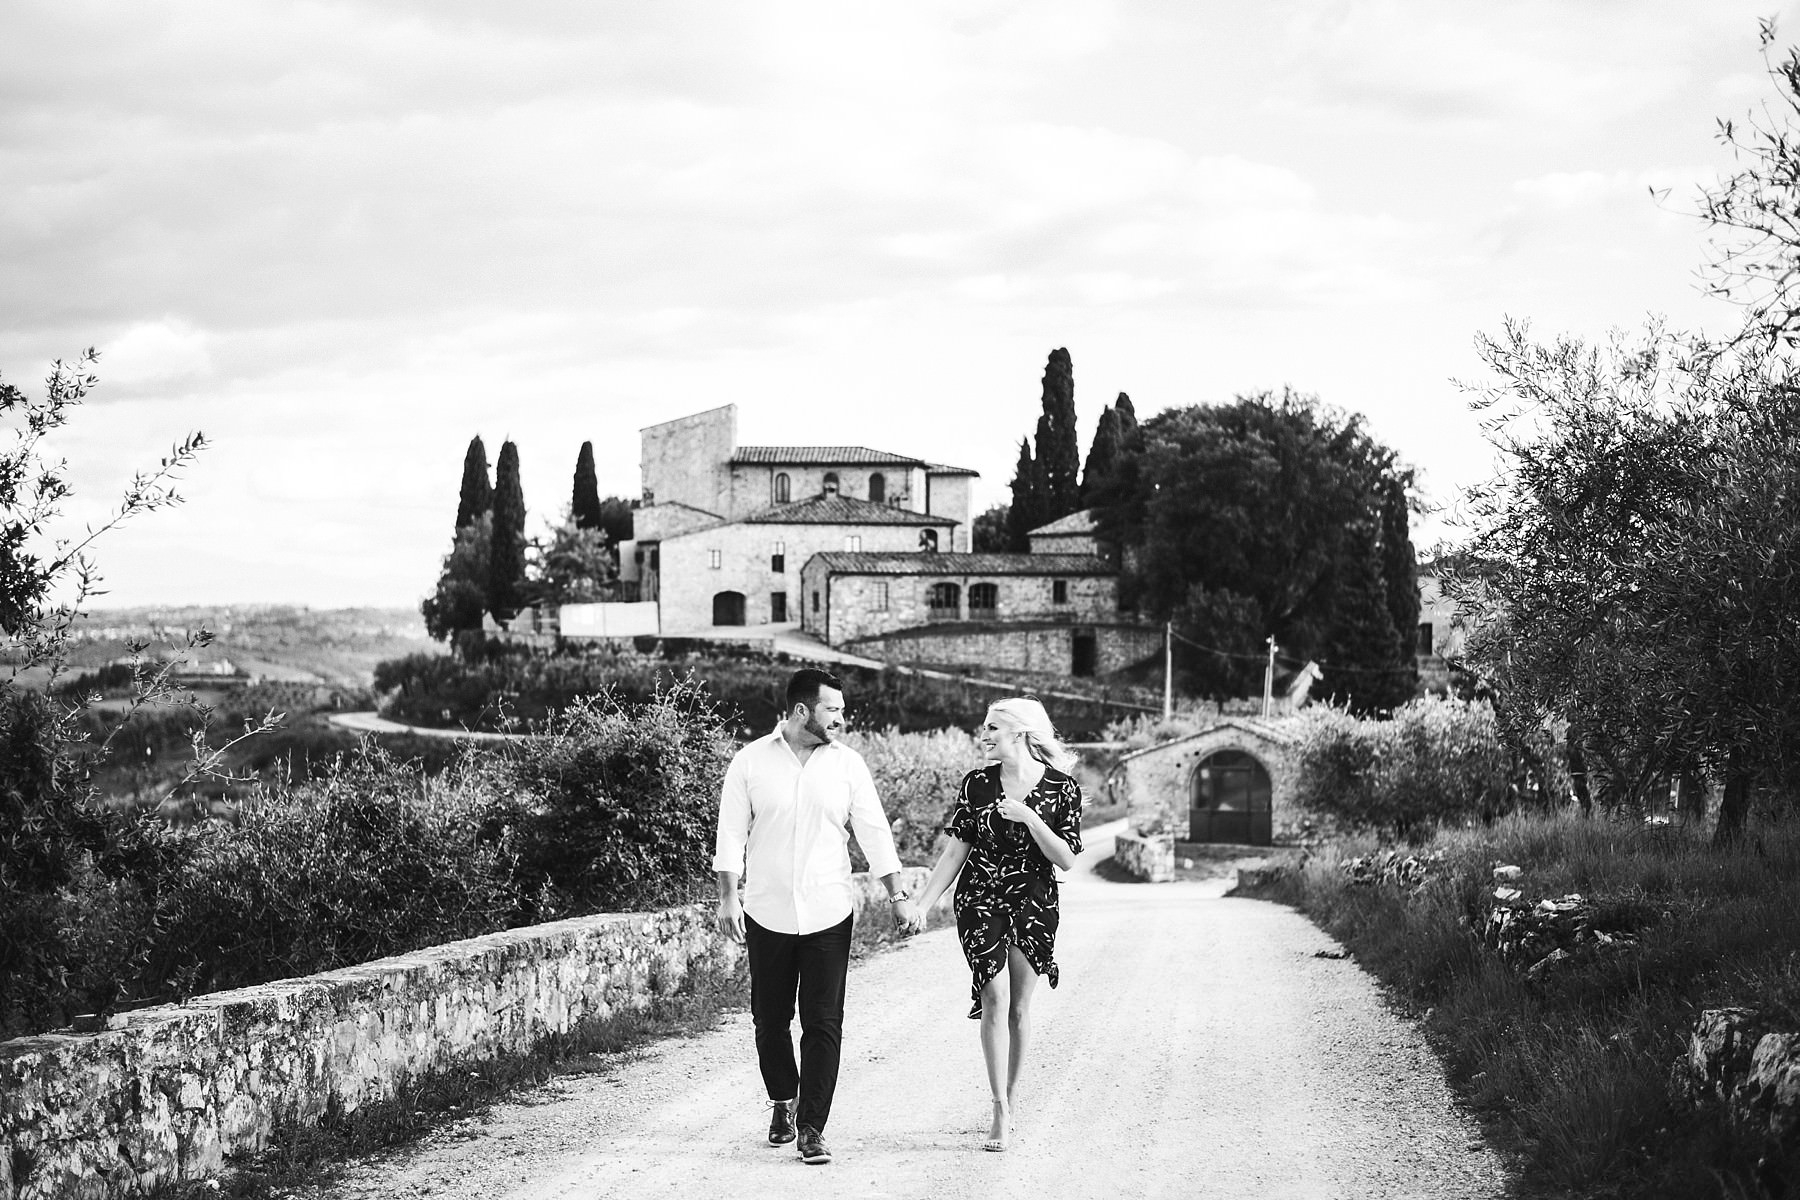 Lovely couple portrait candid honeymoon vacation photo shoot in Tuscany countryside at Castello La Leccia